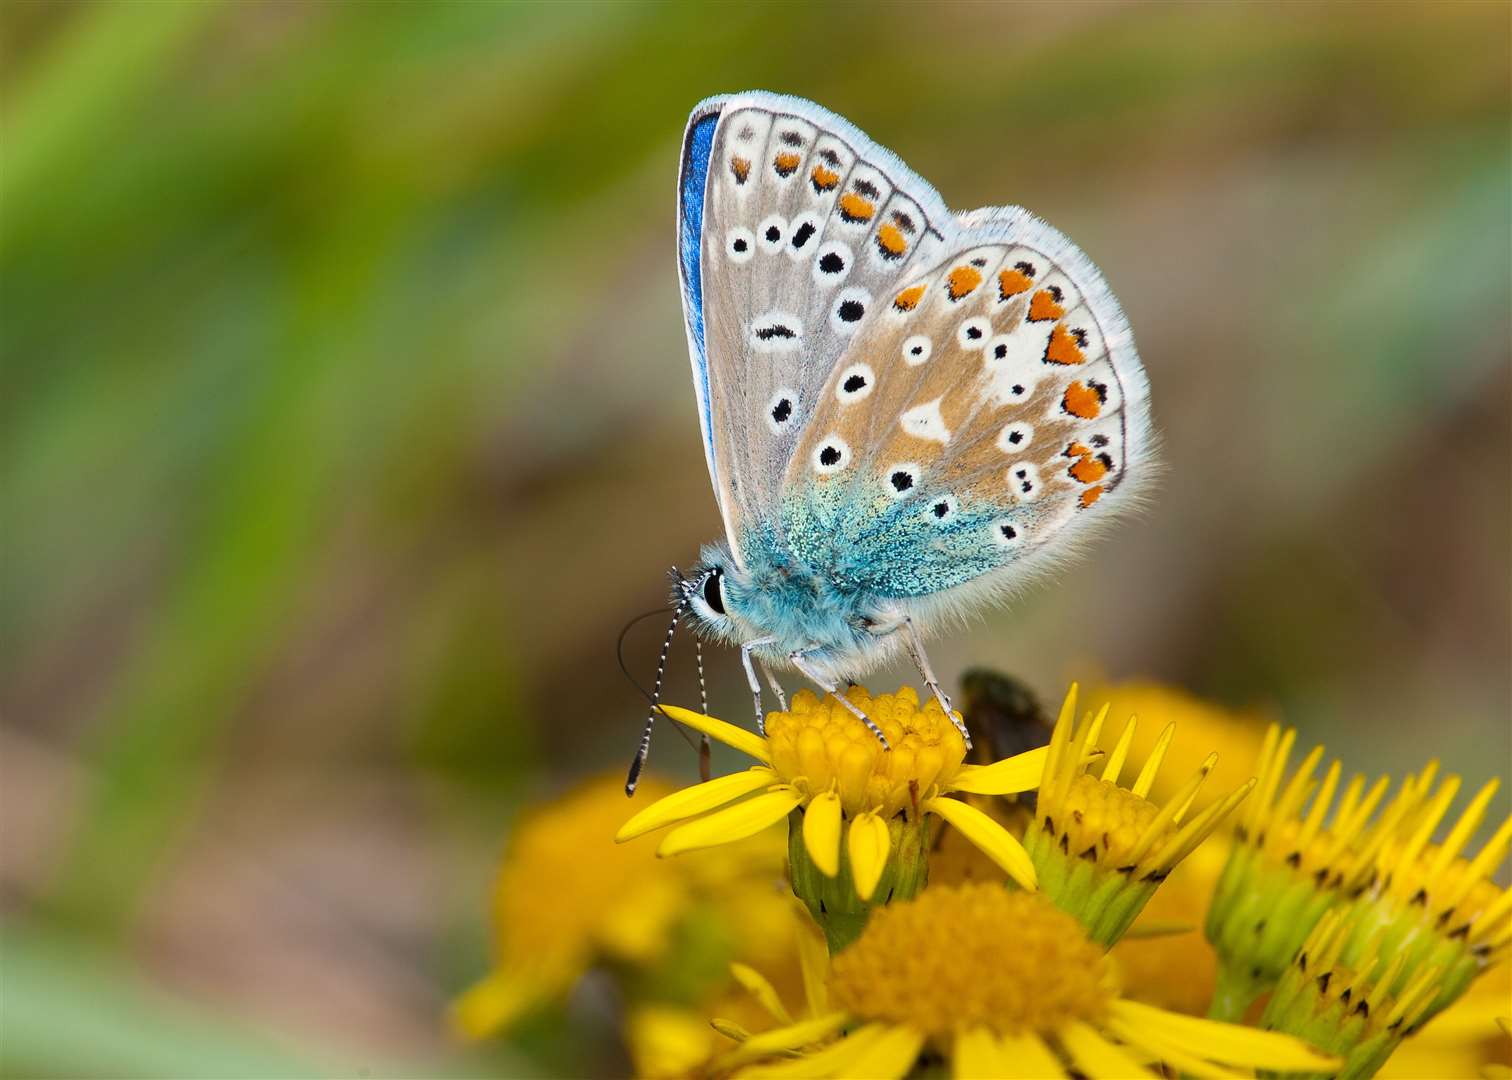 Common Blue butterfly feeding on a flower. Image: Adobe stock image.